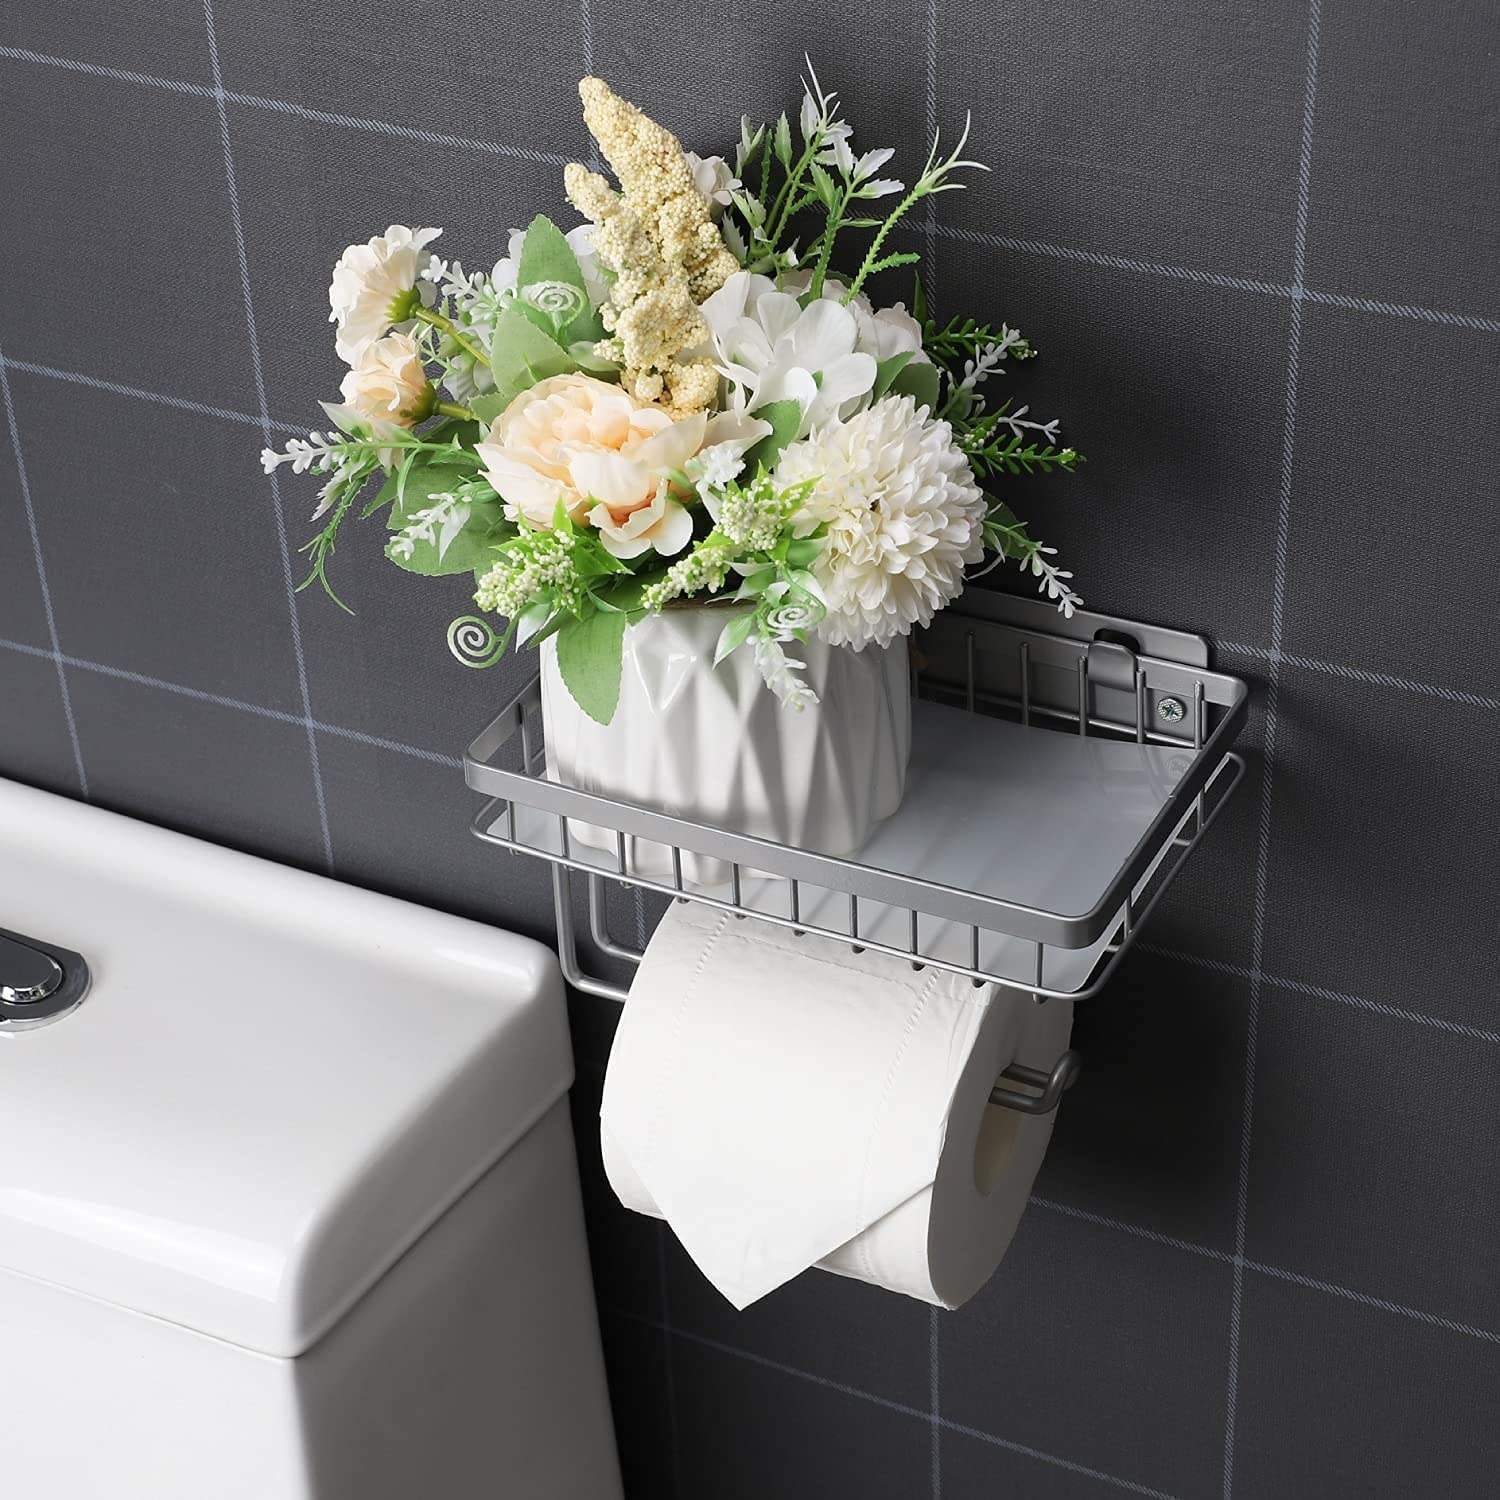 The toilet paper holder in a bathroom with some flowers on top of it